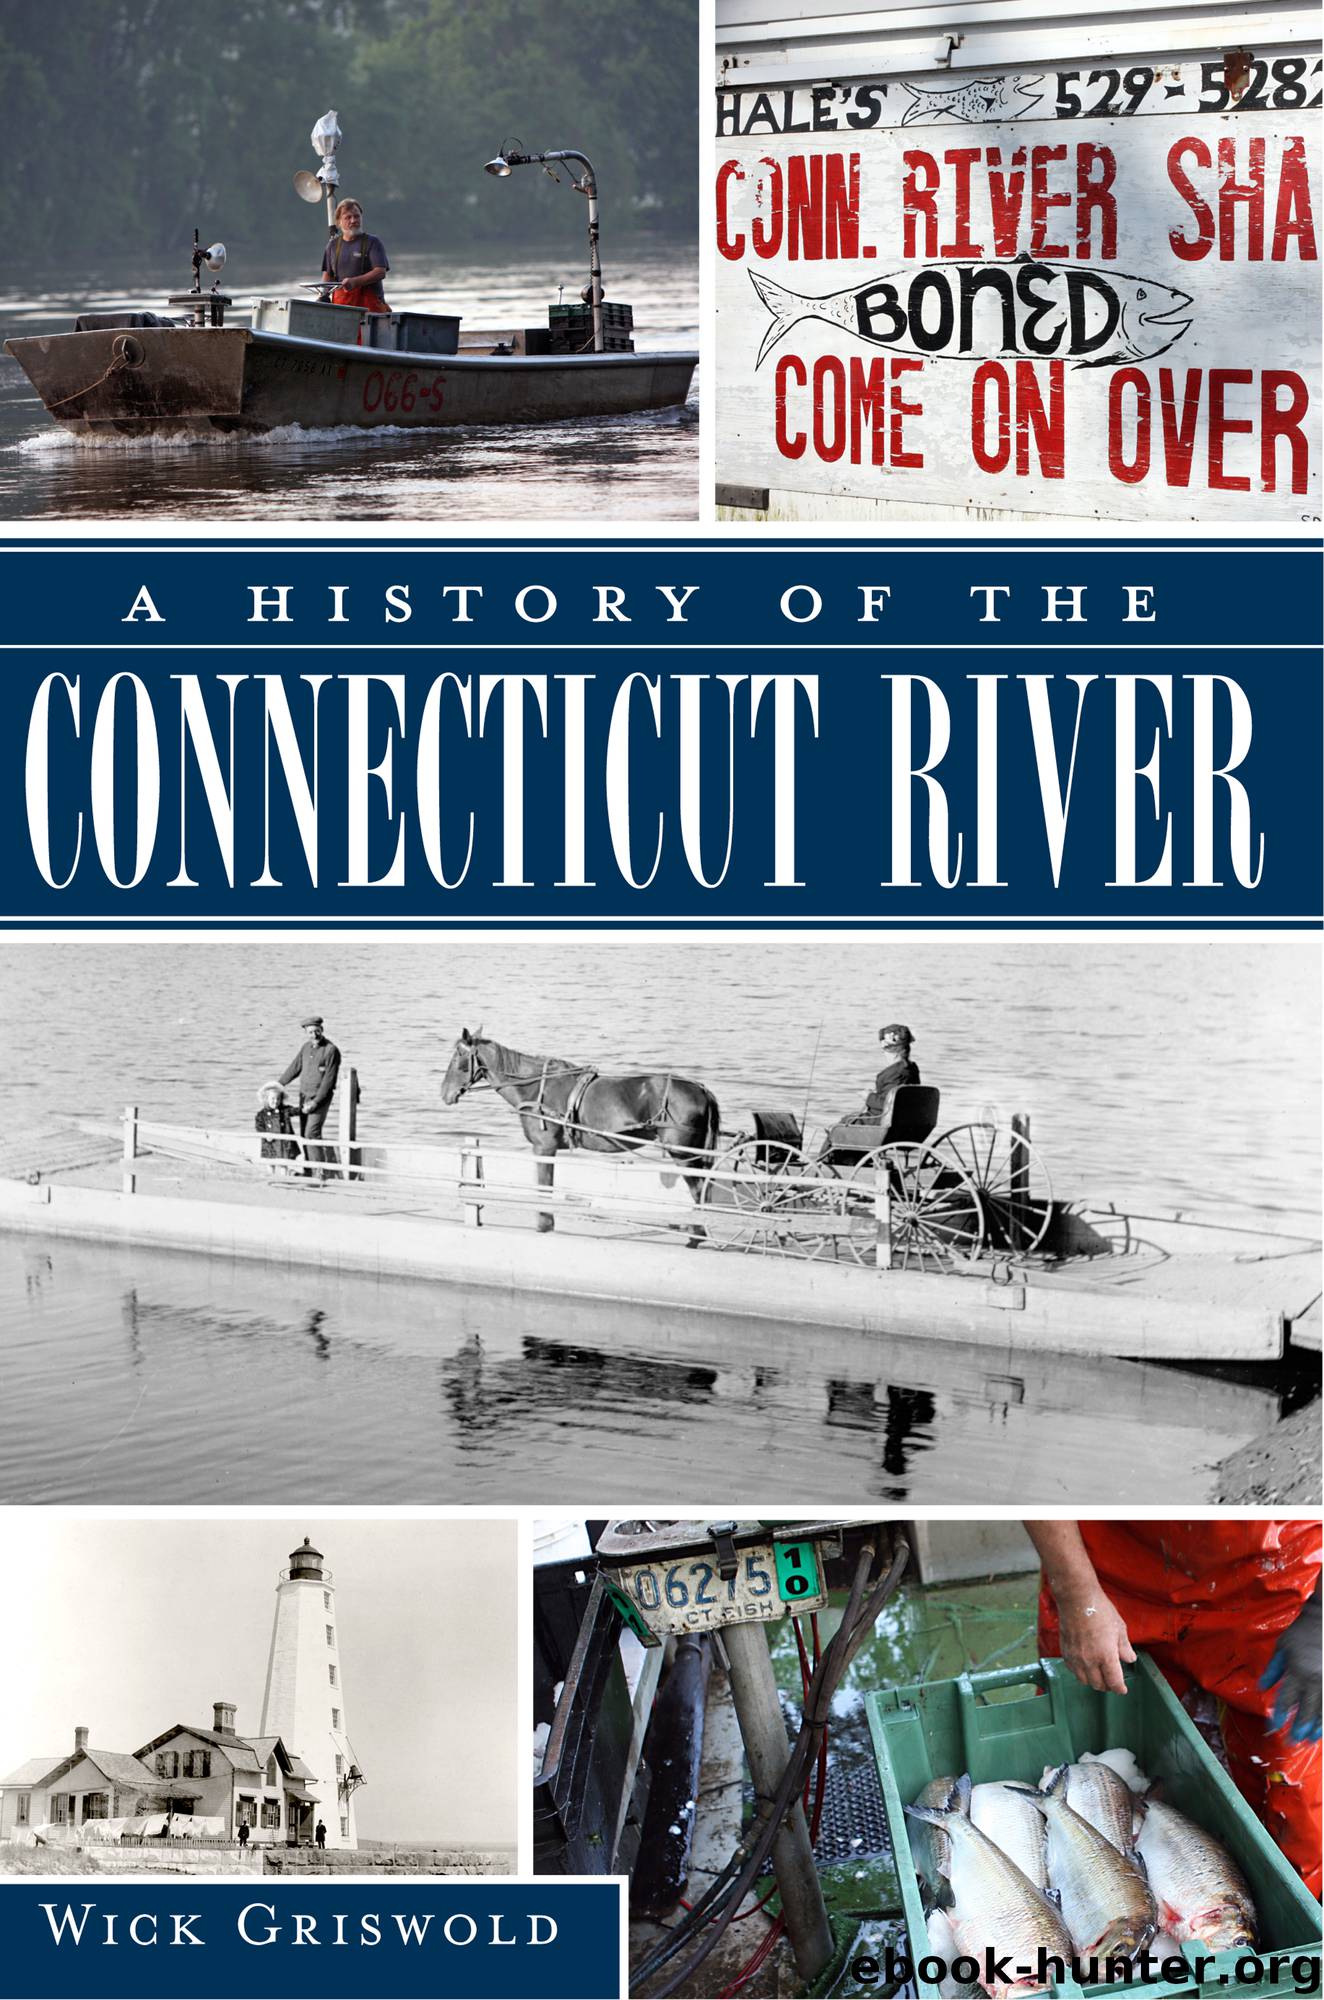 A History of the Connecticut River by Wick Griswold